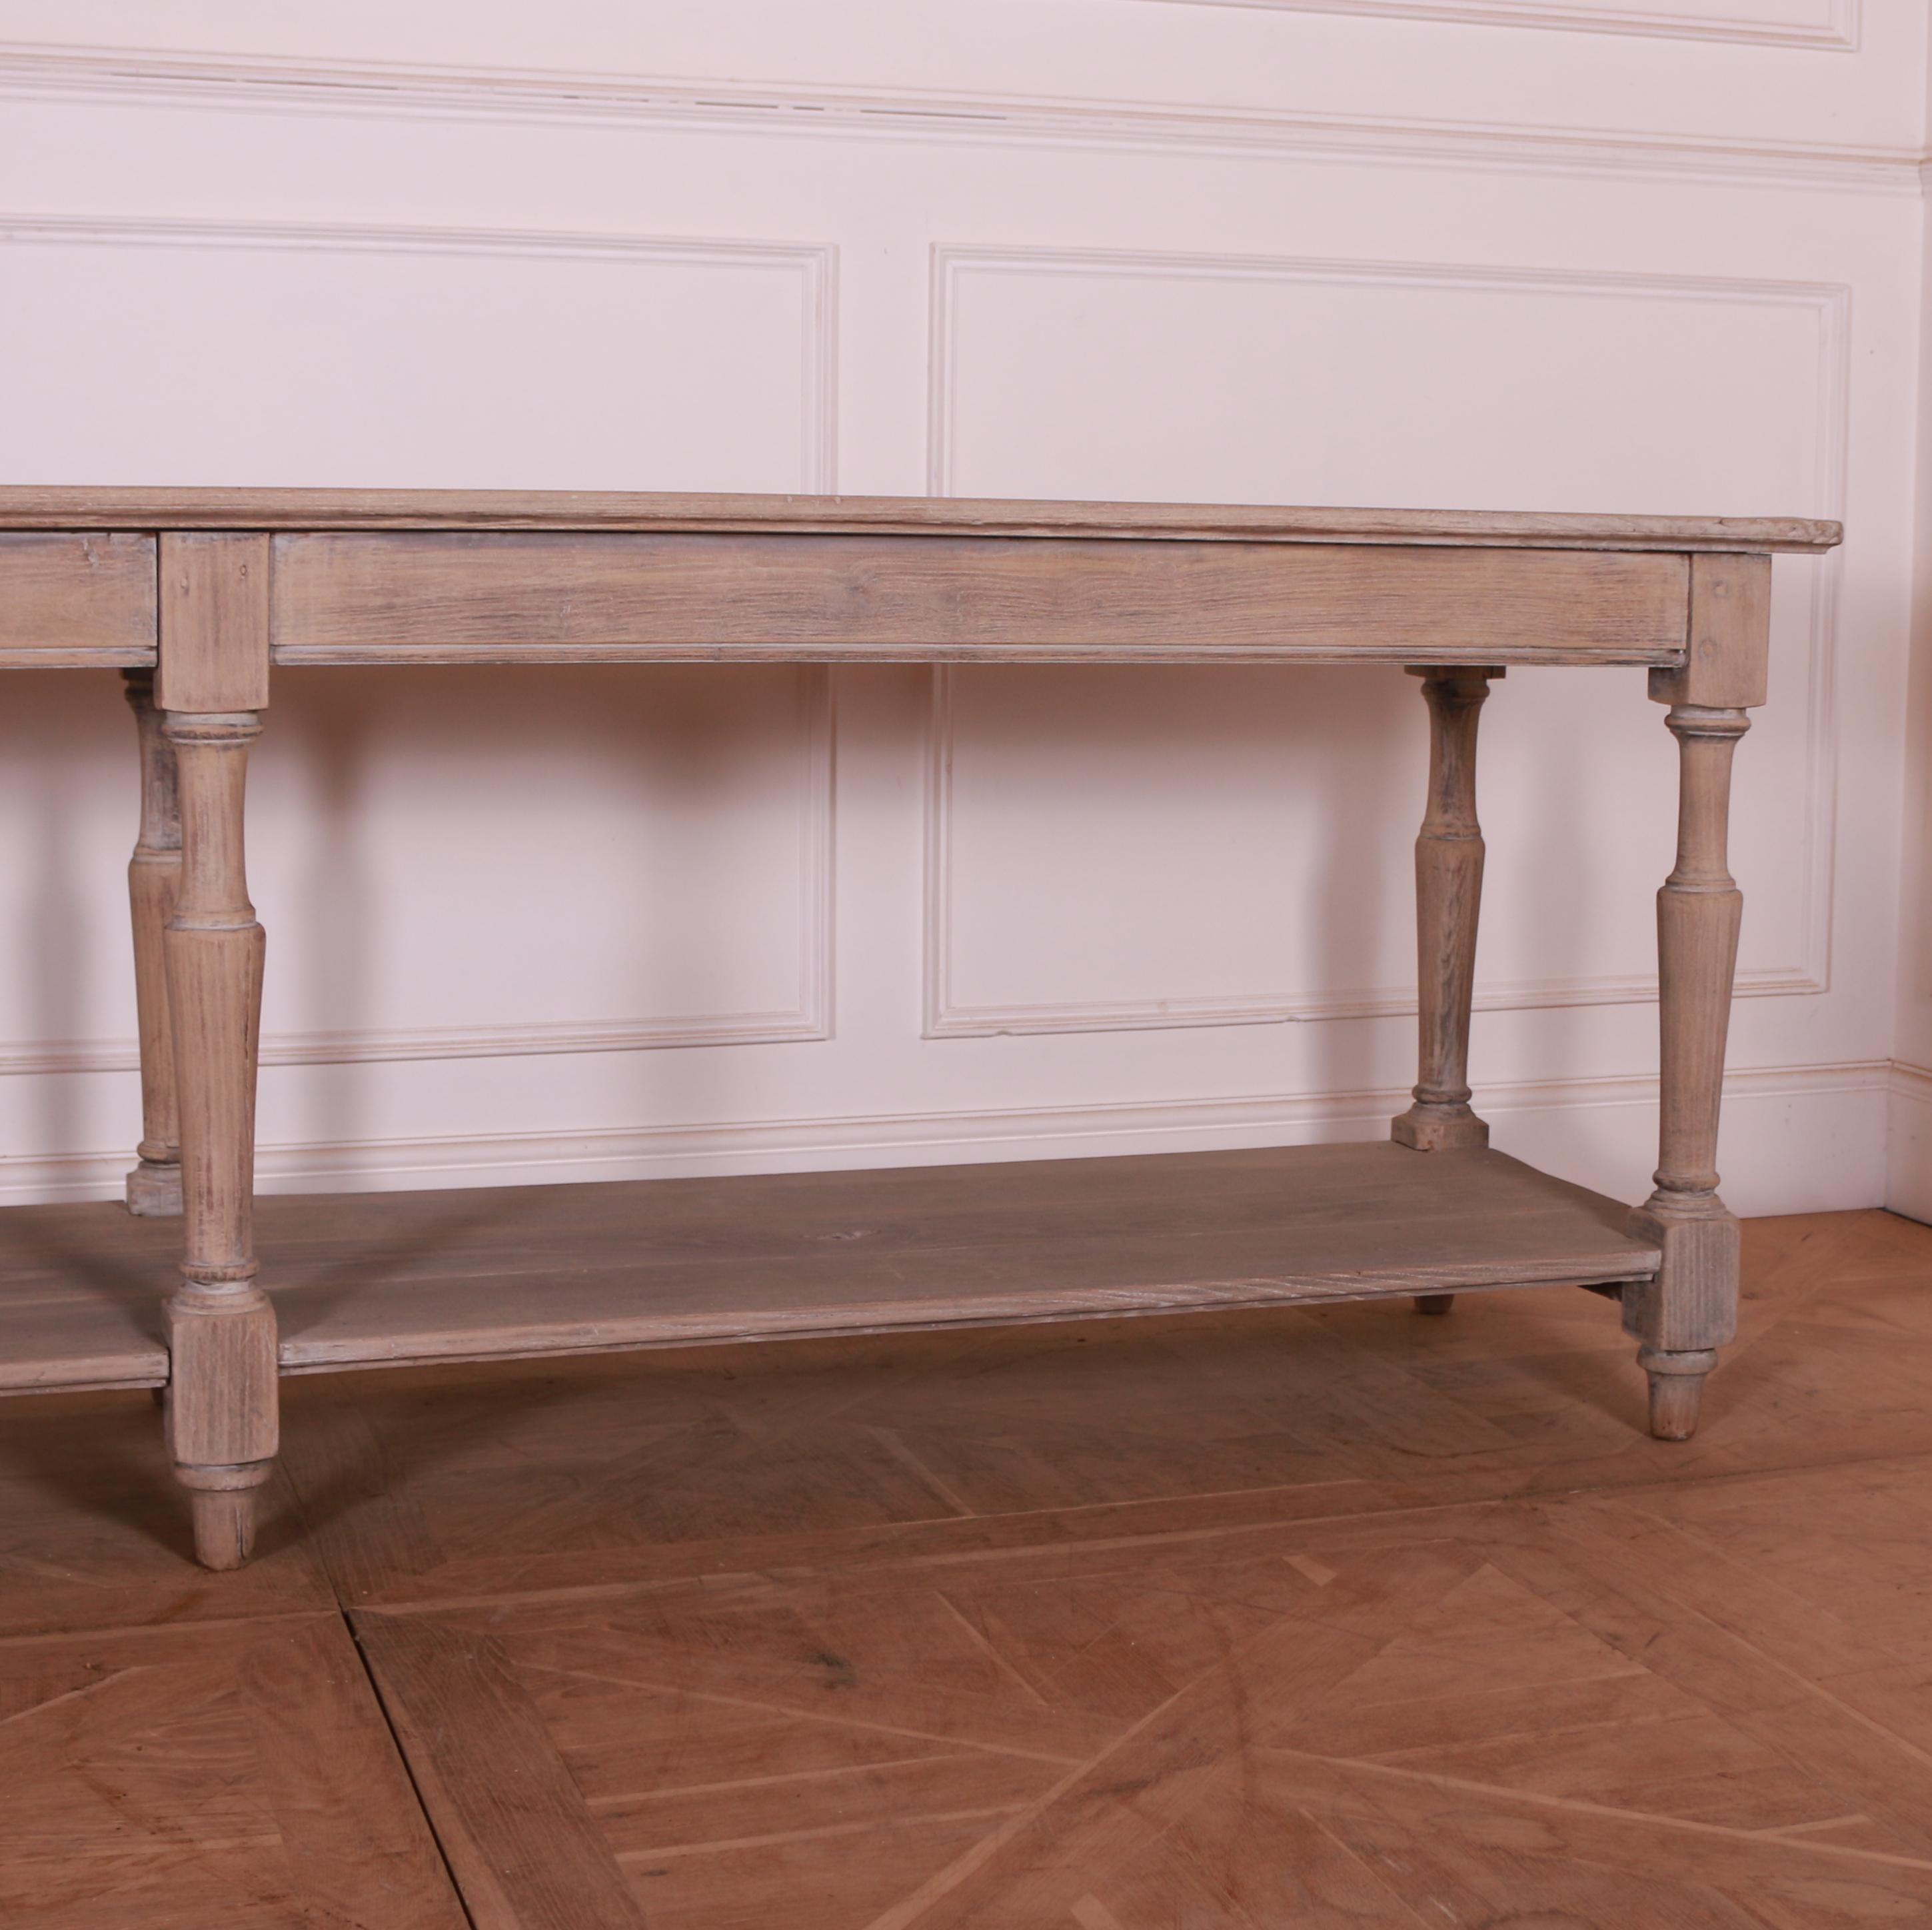 Good 19th C French bleached oak drapers table. 1890.



Dimensions
102.5 inches (260 cms) Wide
24.5 inches (62 cms) Deep
31.5 inches (80 cms) High.